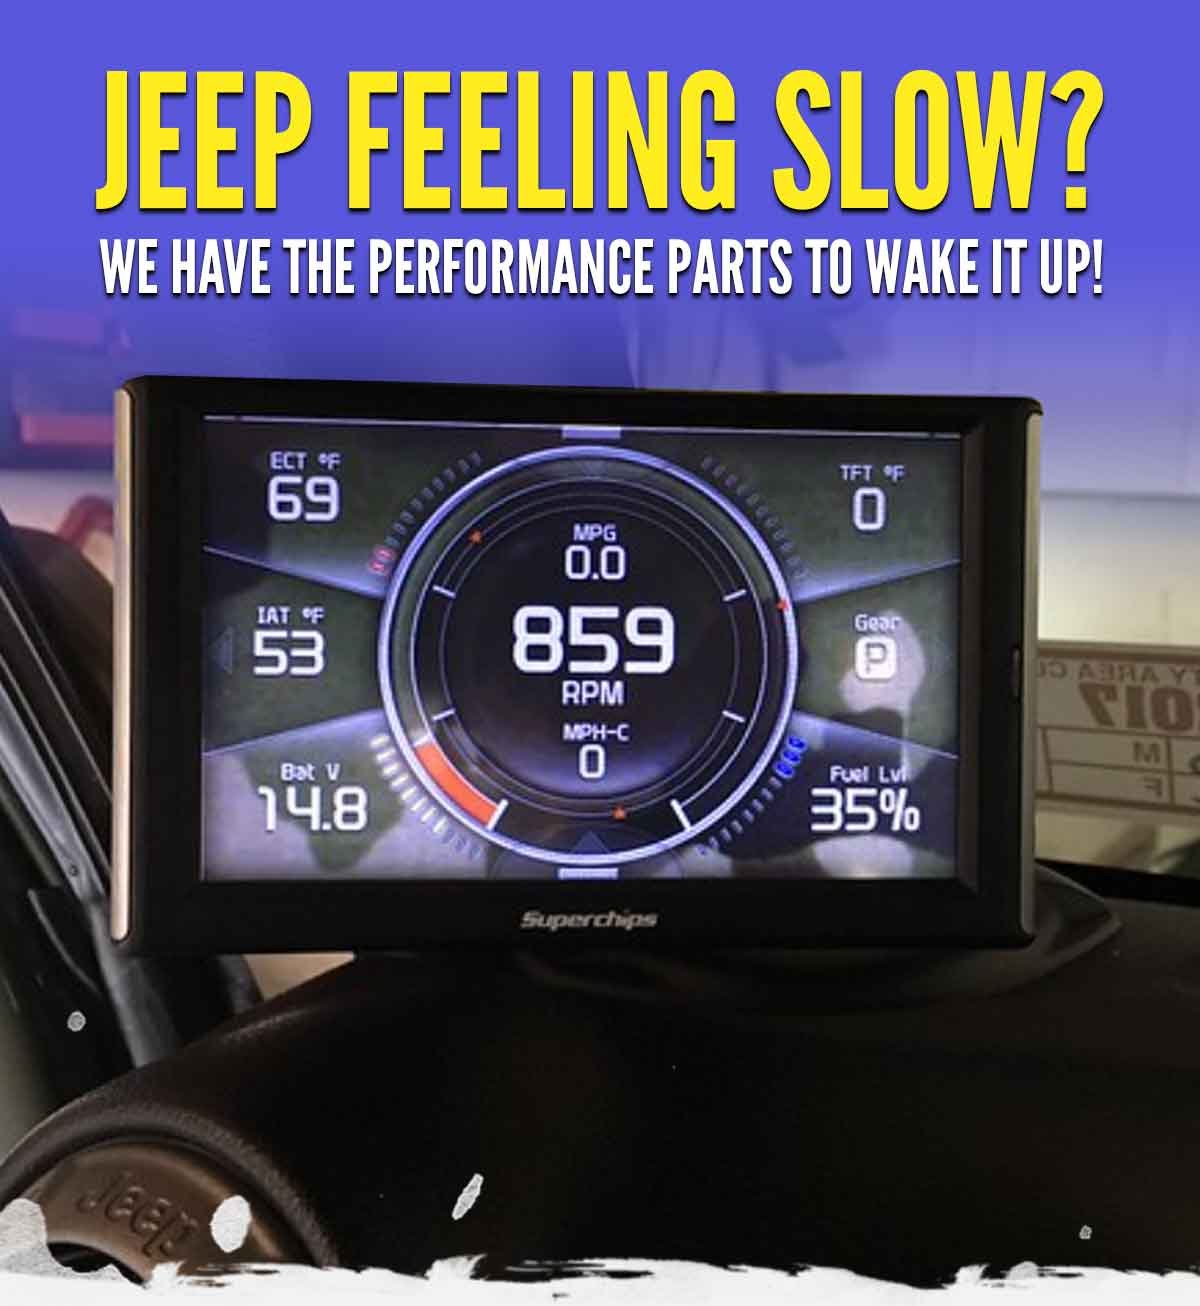 Jeep Feeling Slow? We Have The Performance Parts To Wake It Up!